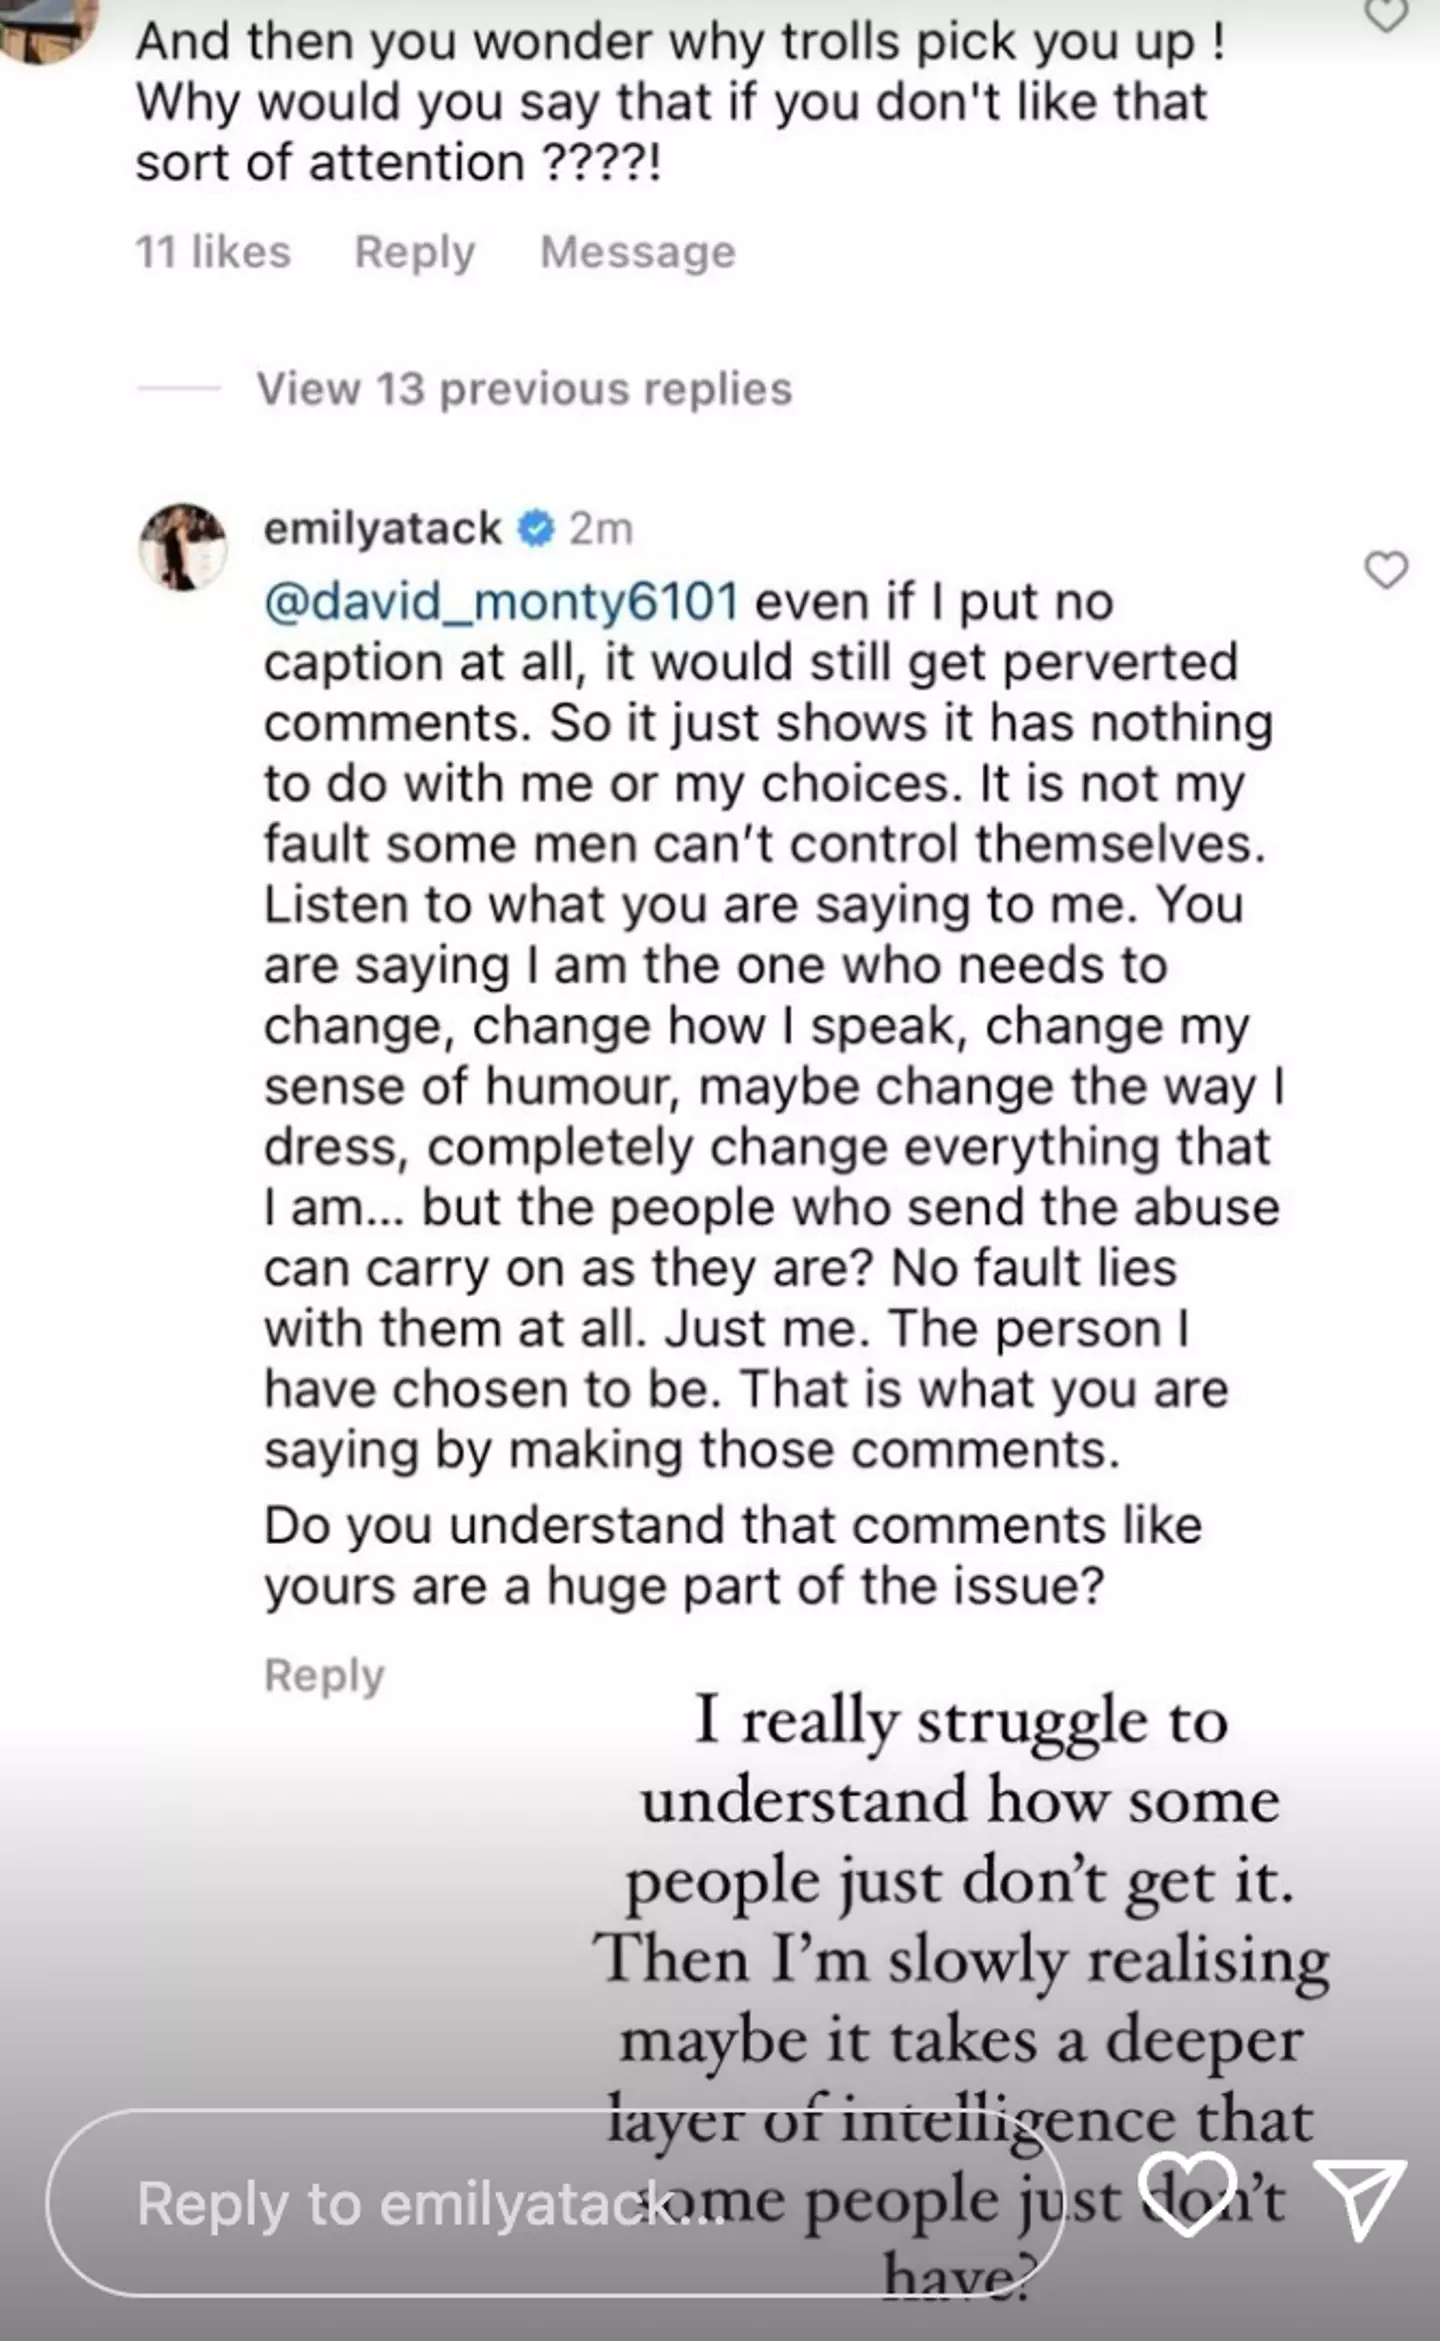 Emily Atack criticised the person who accused her of asking for attention.